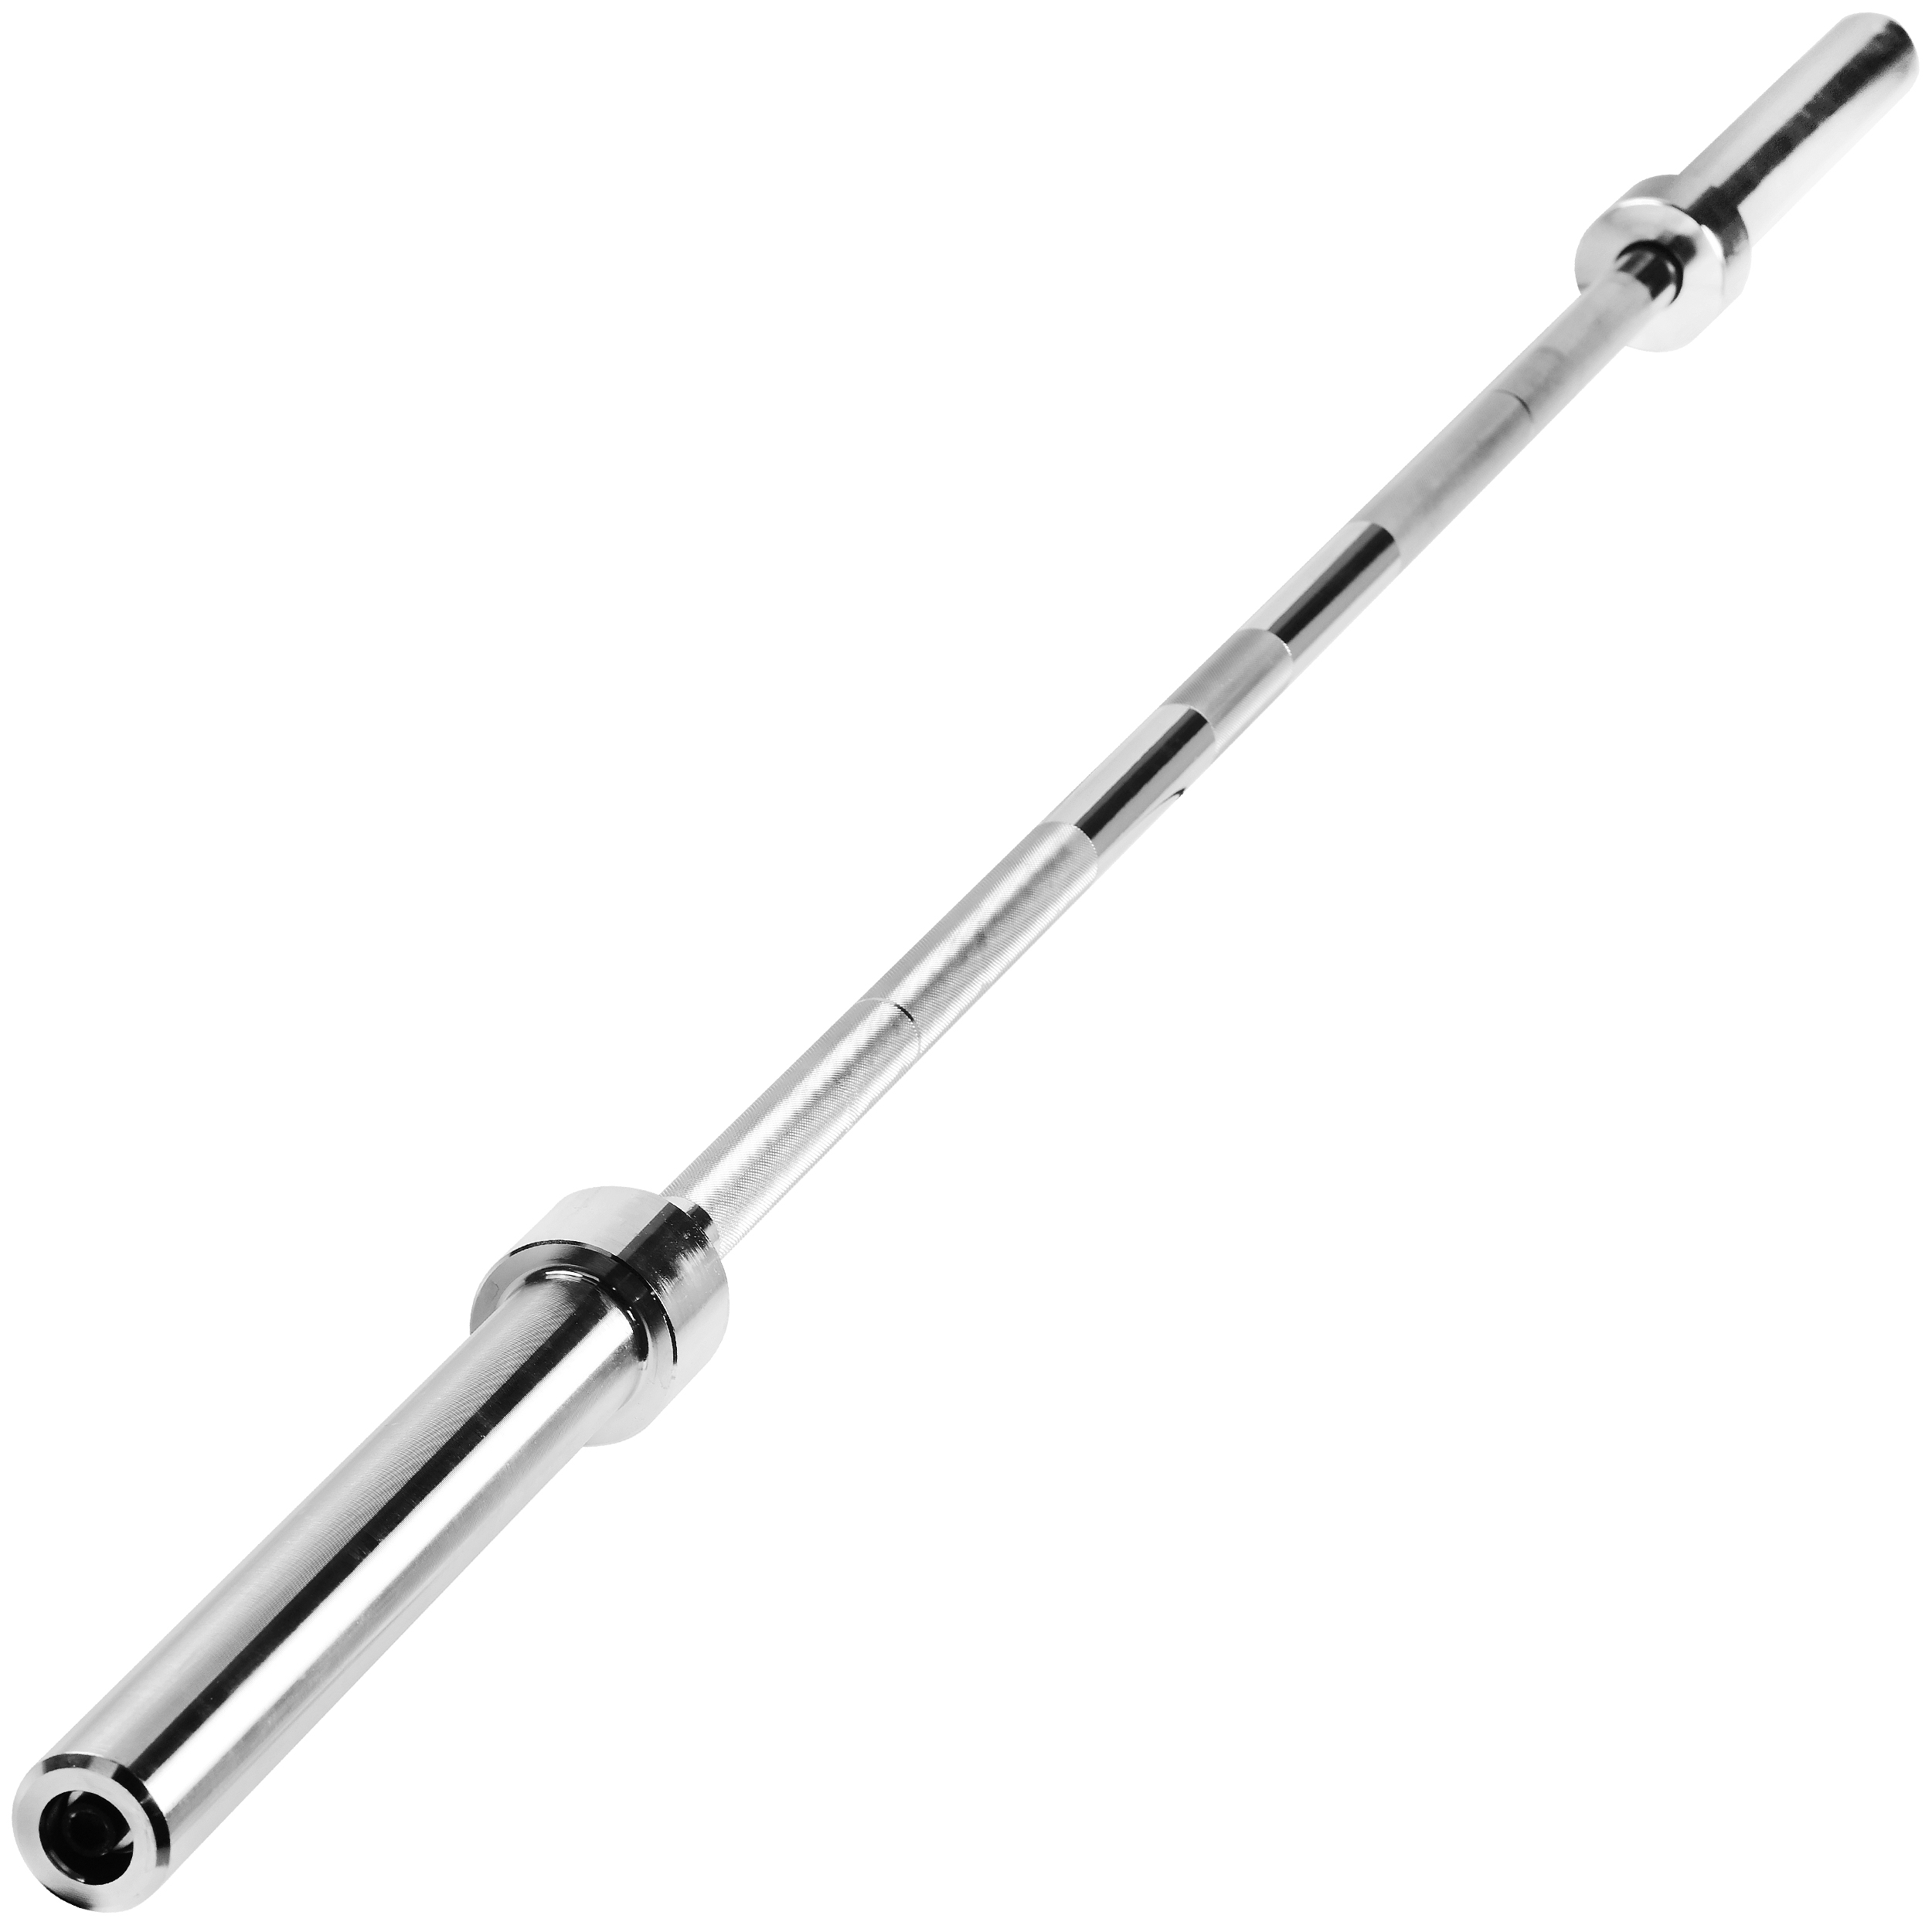 PRCTZ 7 ft Olympic Barbell with 2 In. Sleeve Diameter, 45 Pound Weighted Barbell with 800-Pound Capacity, Available in Black and Chrome - image 1 of 10